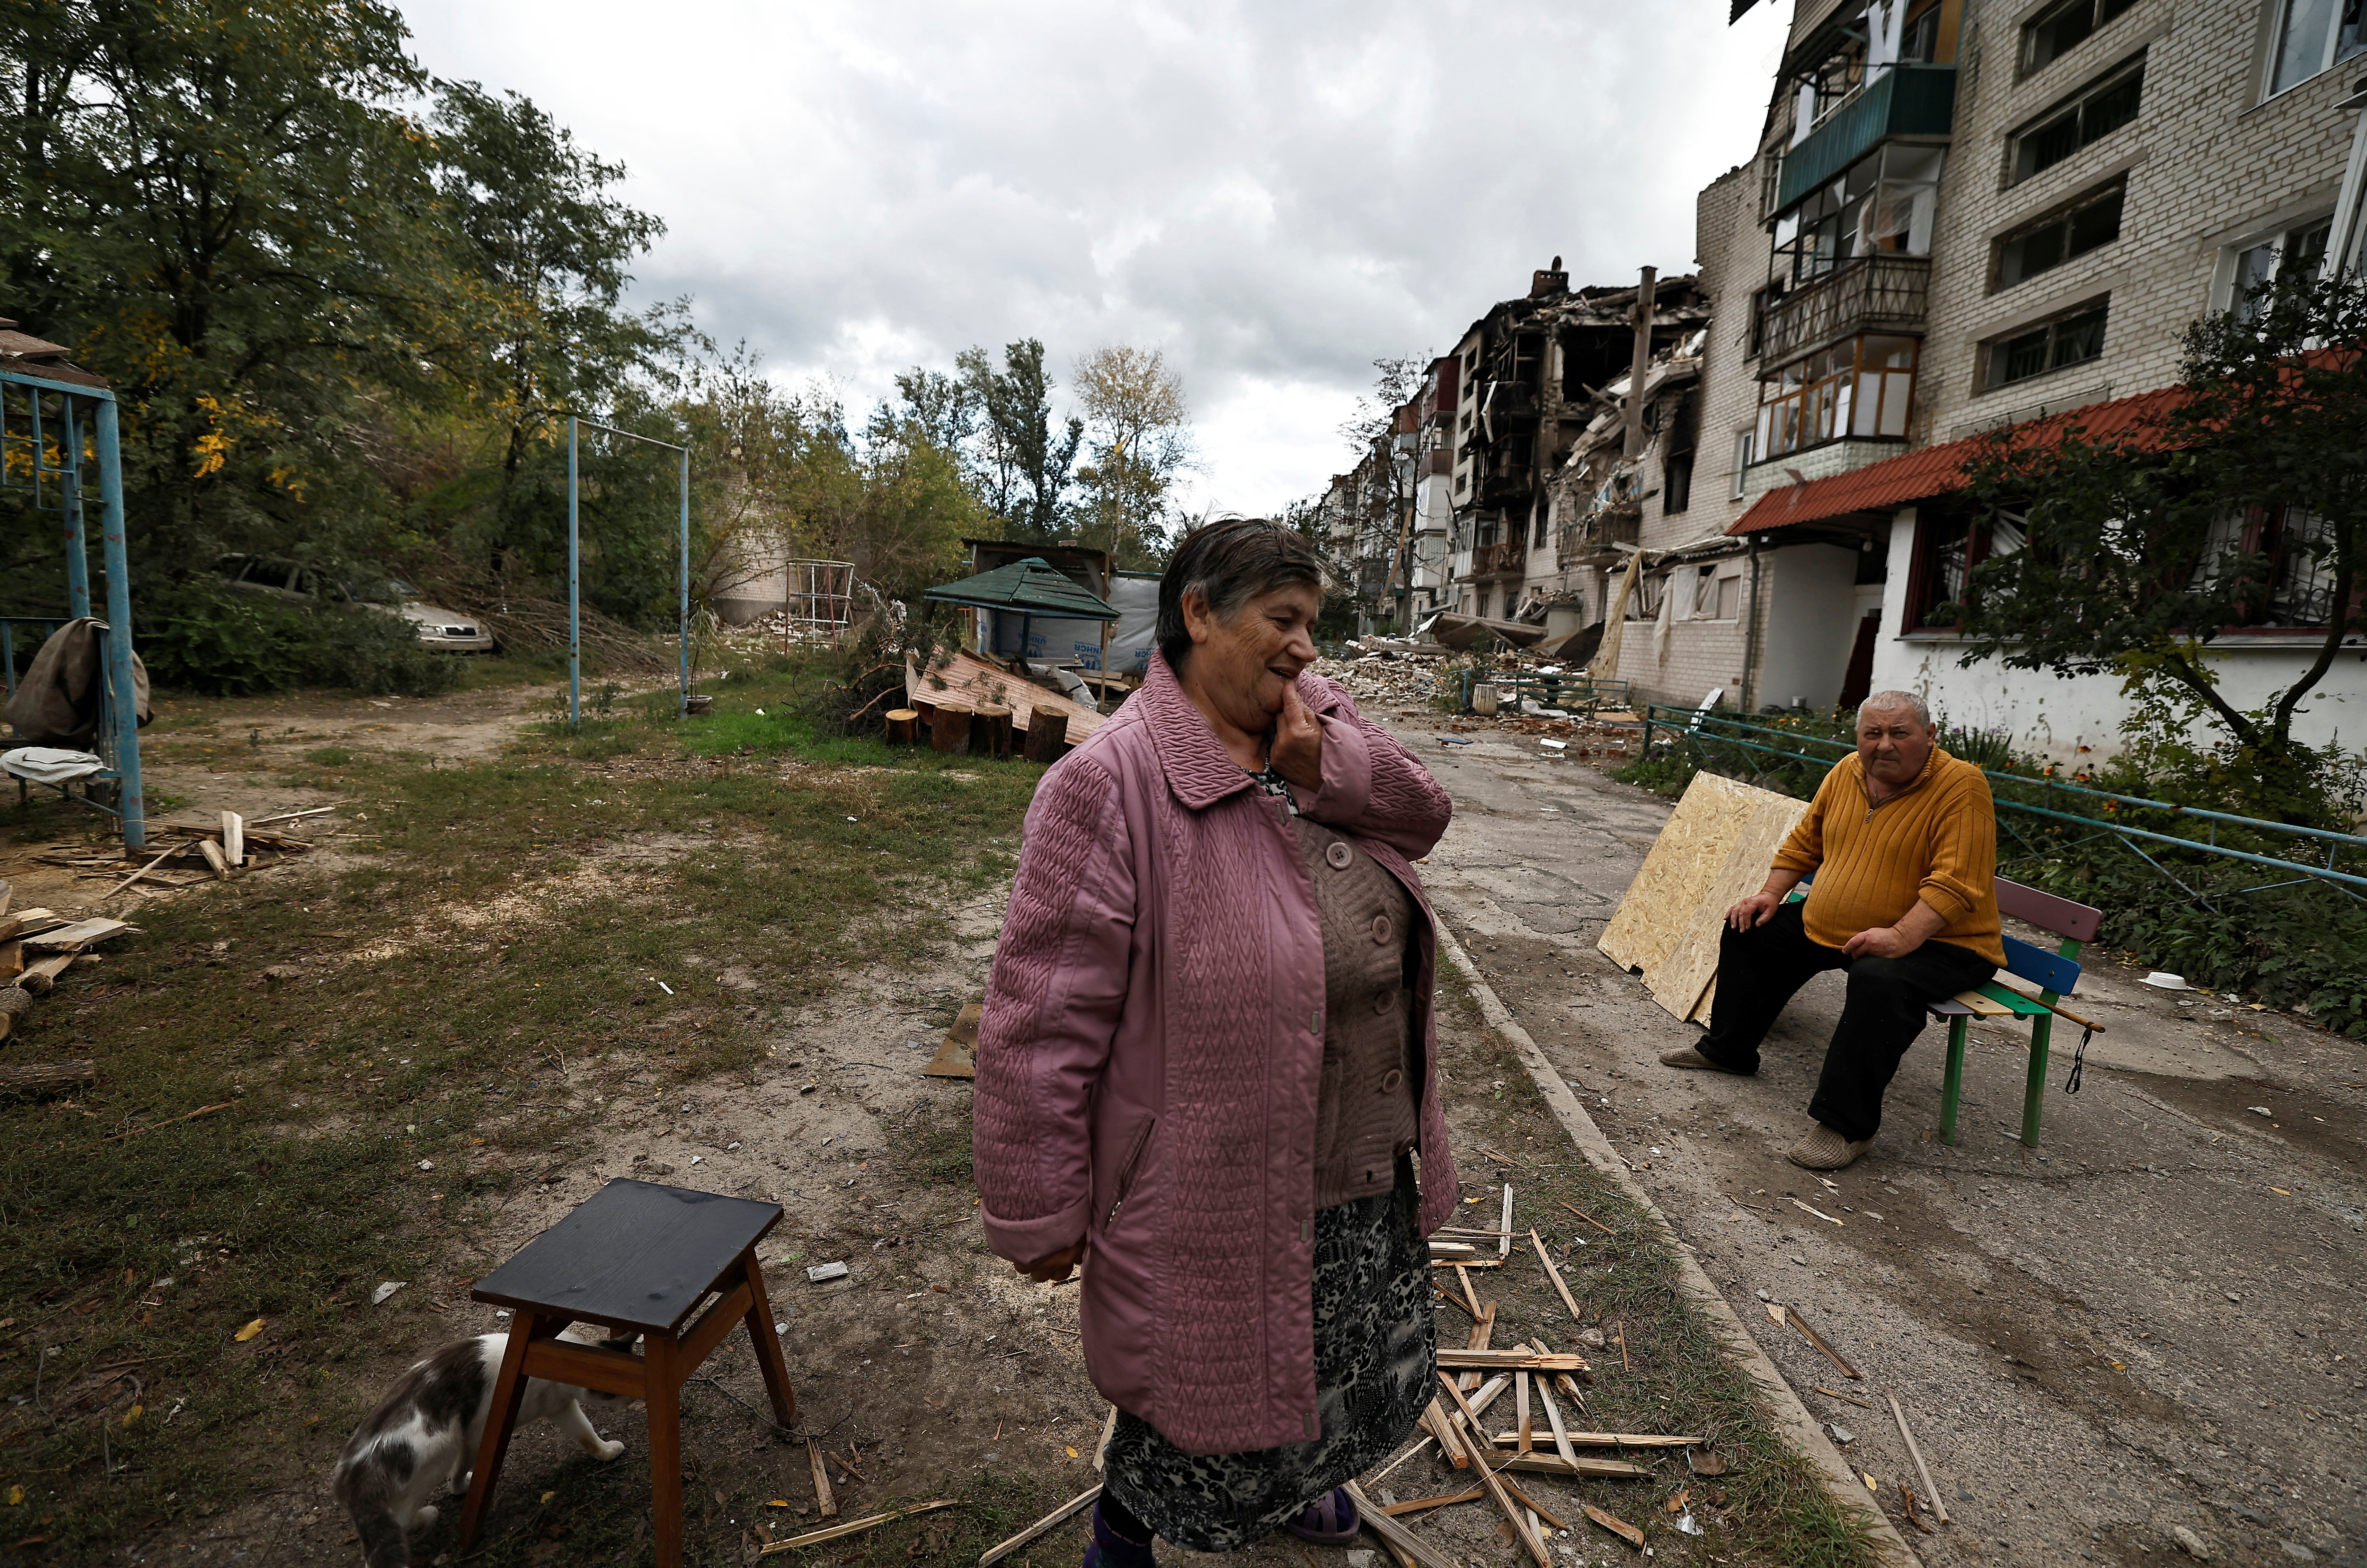 A woman reacts as she stands outside a building that was damaged by Russian missile in Svyatohirsk